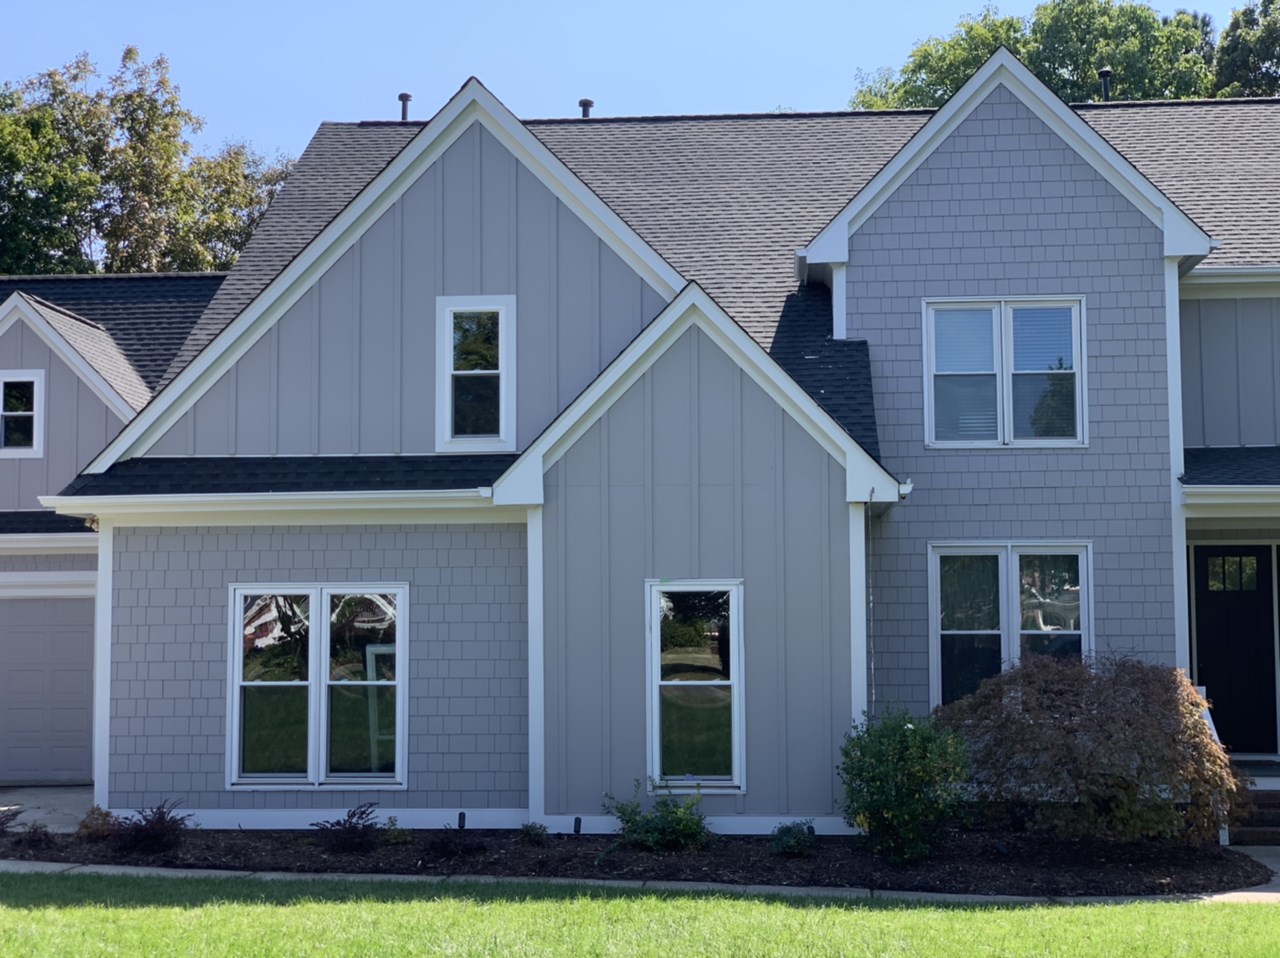 Jamie & Andrew O. – Cary James Hardie Siding Replacement